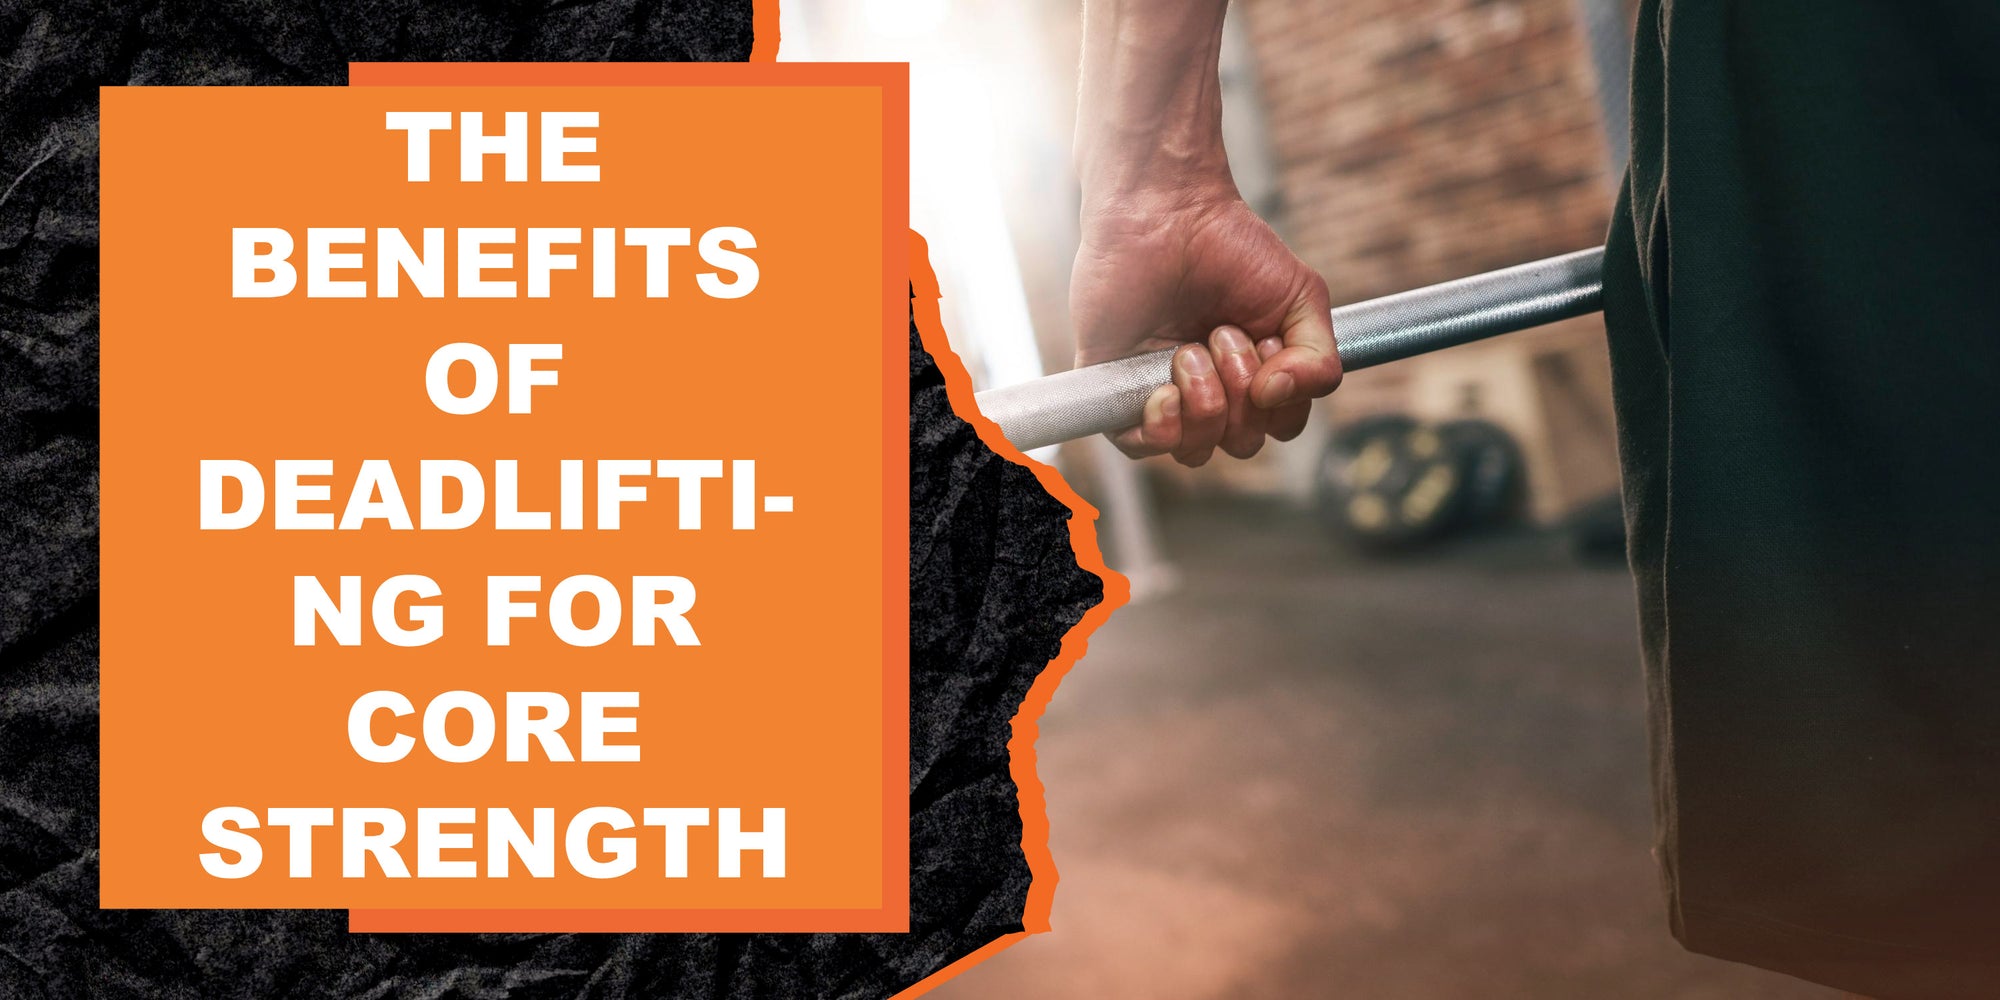 The Benefits of Deadlifting for Core Strength